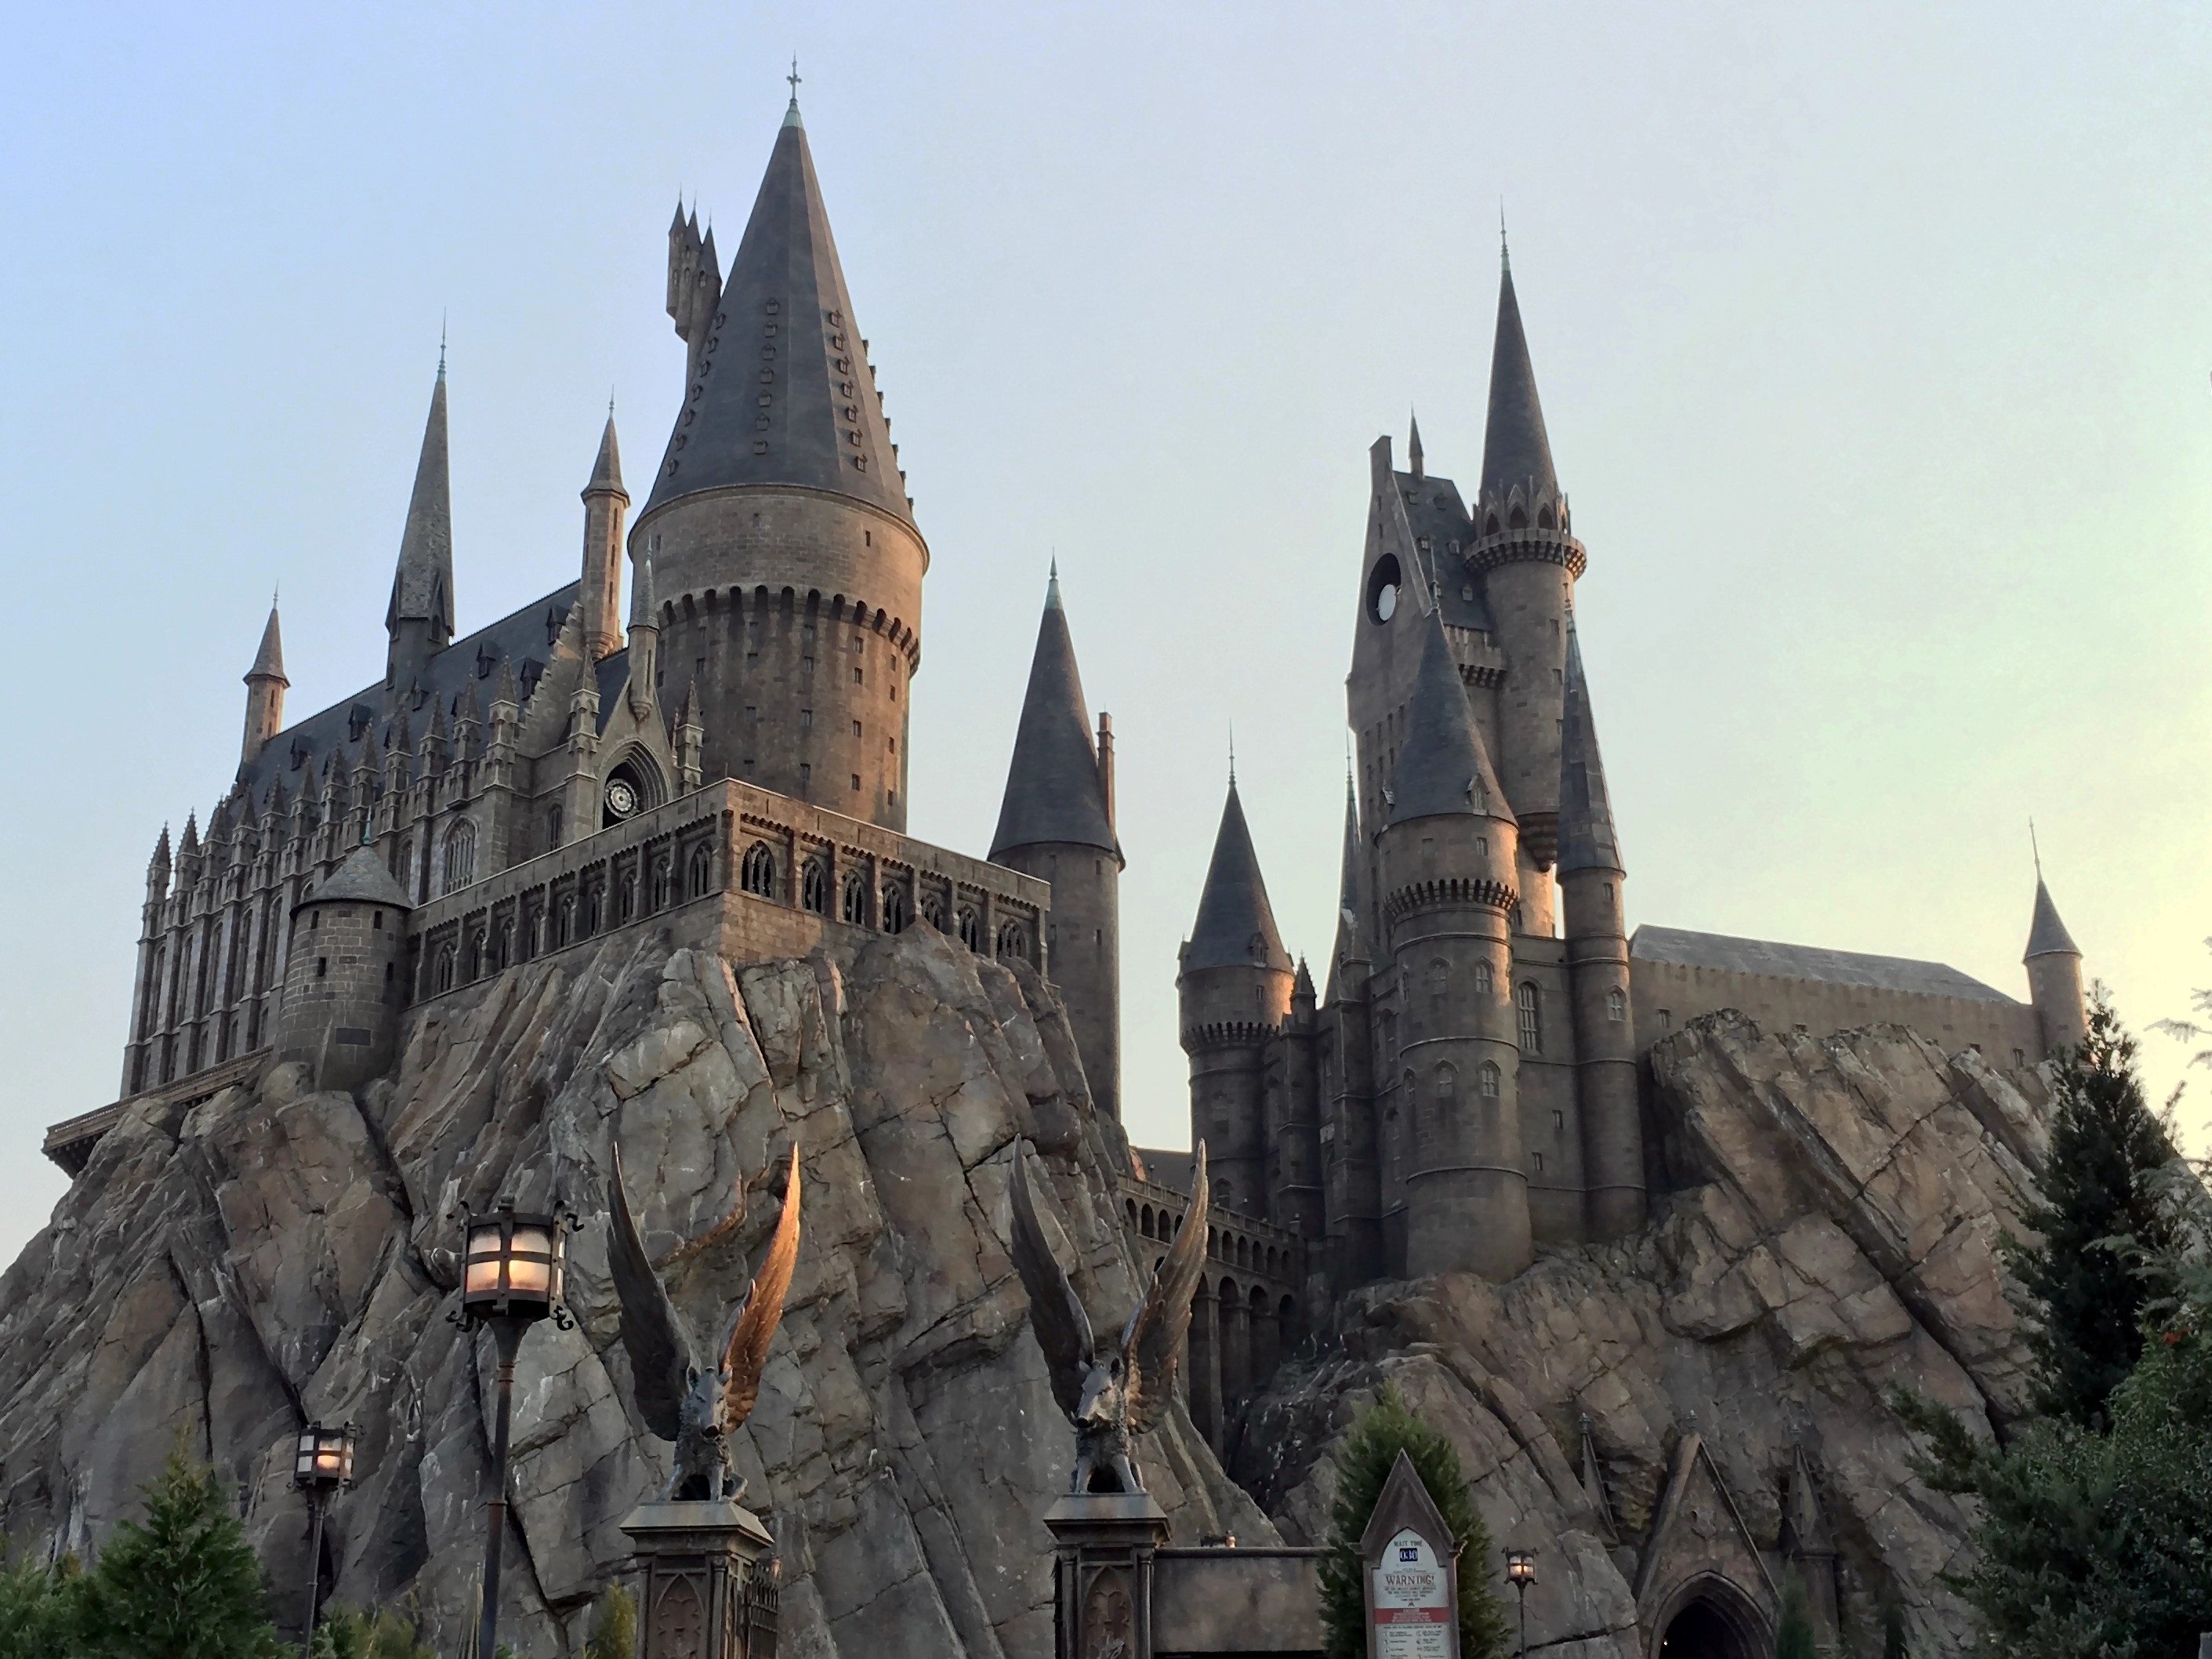 Harry Potter and the Forbidden Journey at Islands of Adventure